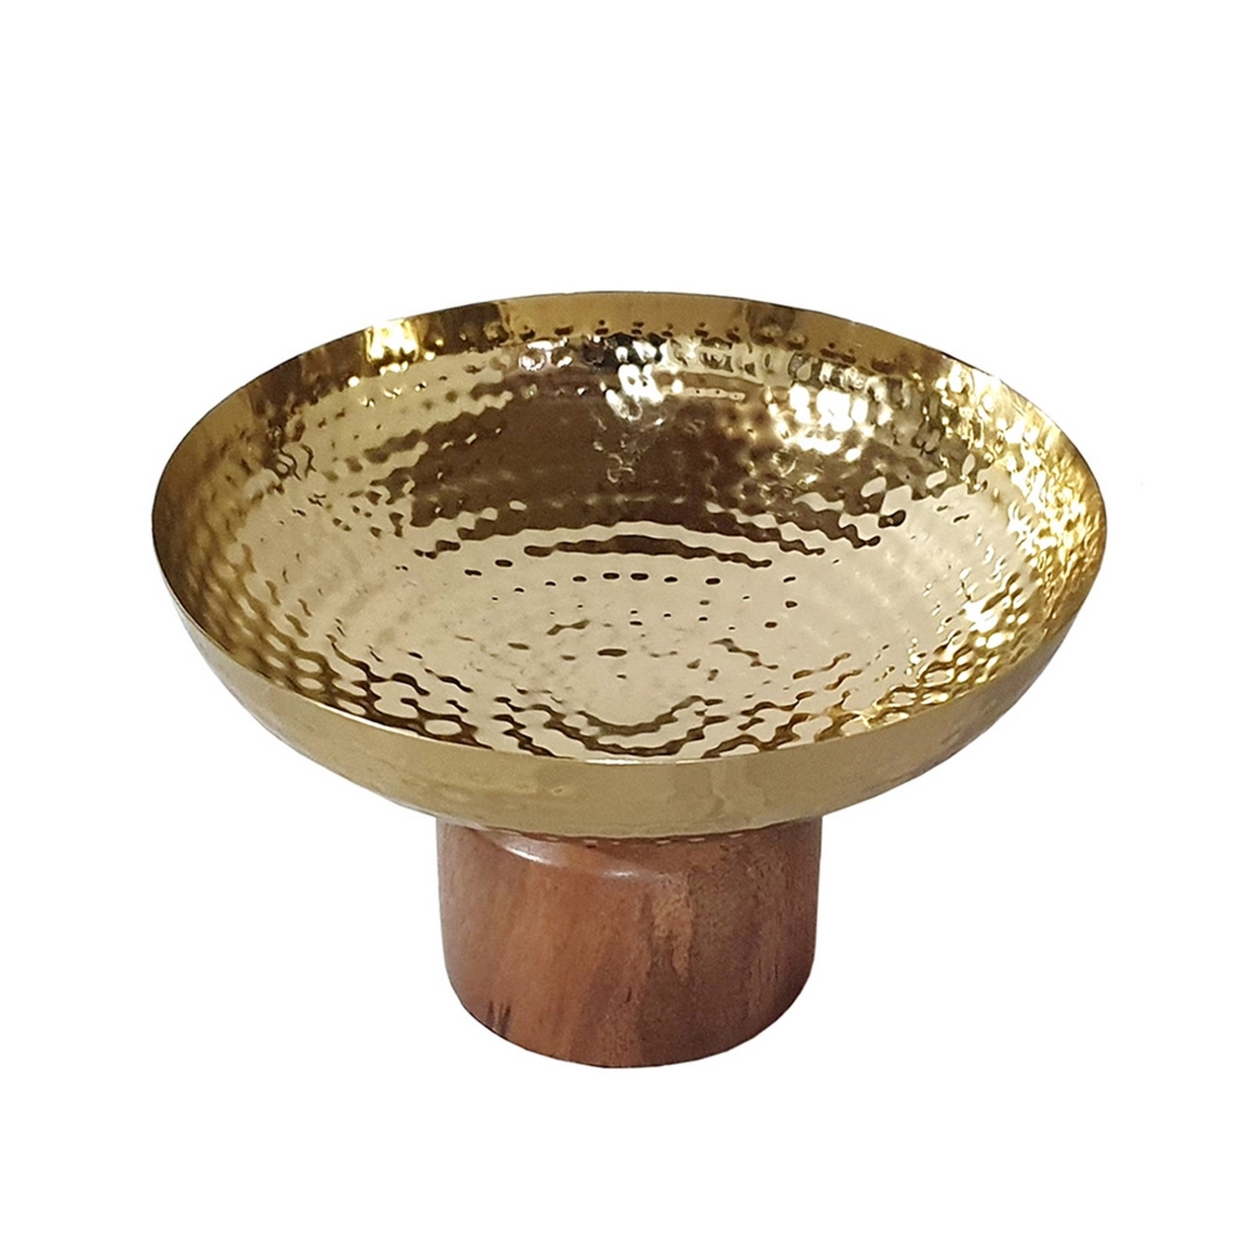 Roe 8 Inch Small Acacia Wood Table Bowl, Steel, Decorative, Gold And Brown- Saltoro Sherpi